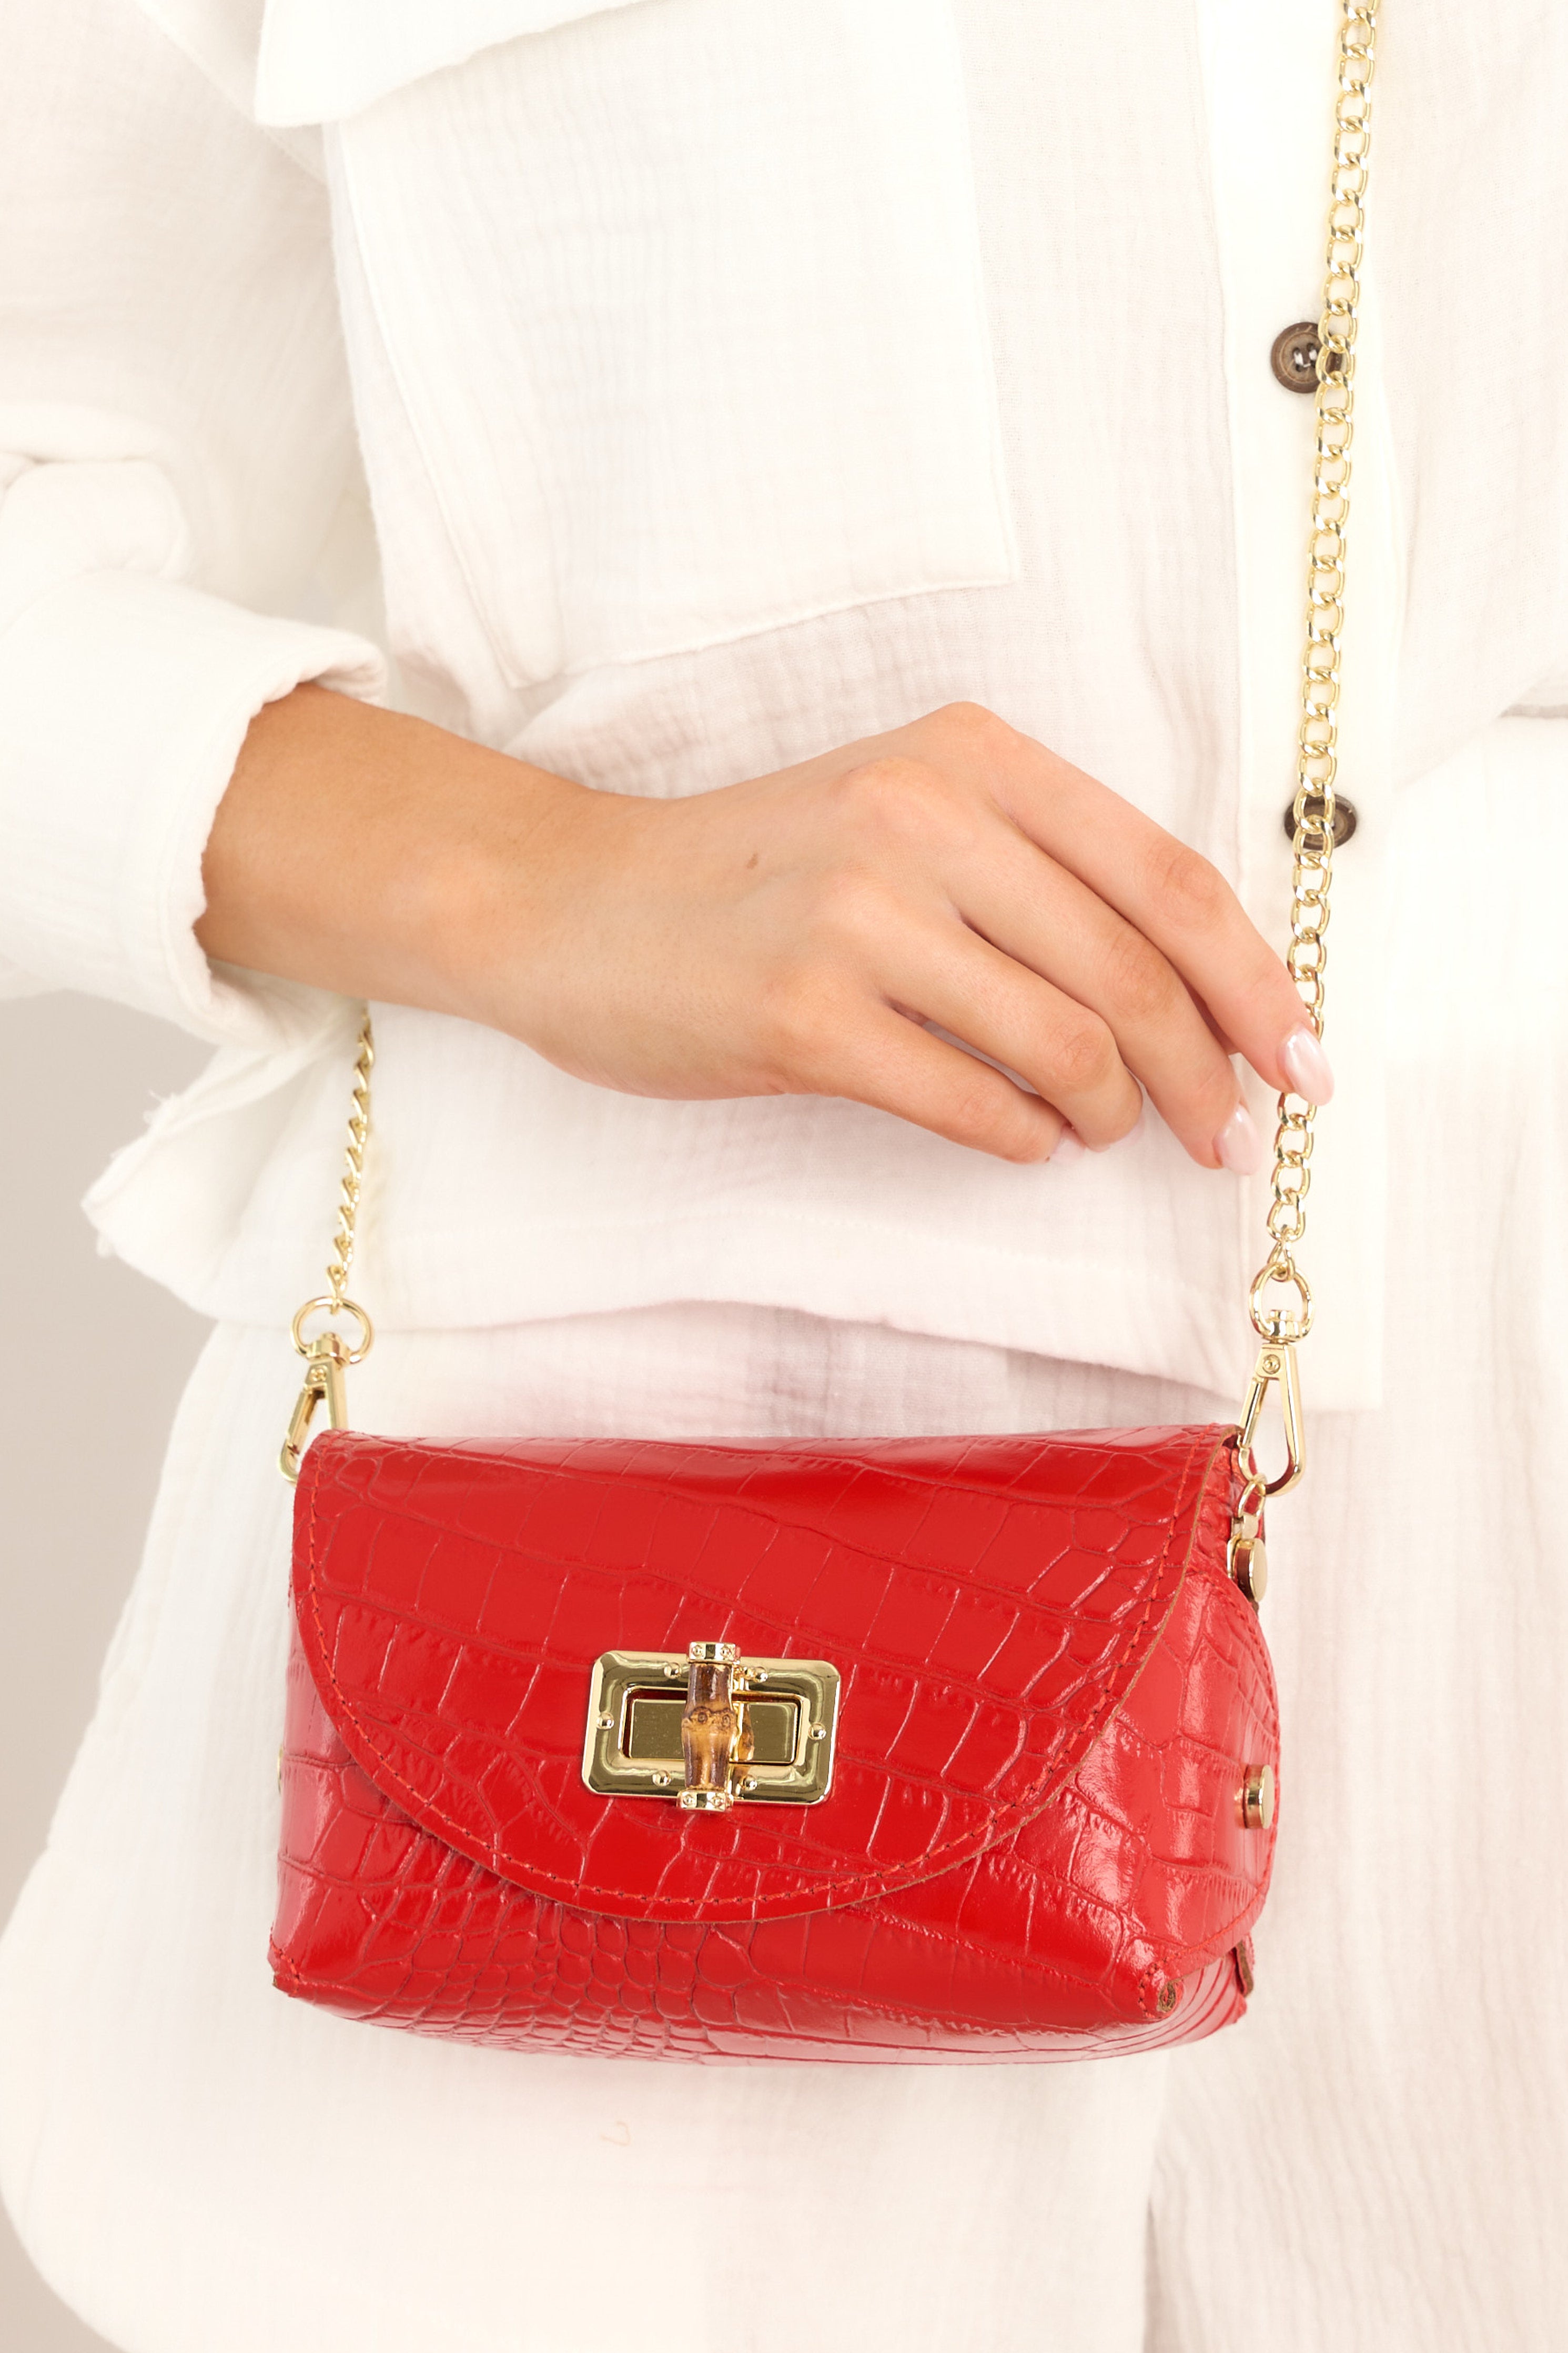 Close up view of a red, vegan leather, textured handbag. This handbag features a gold clasp, as well as a gold strap. 